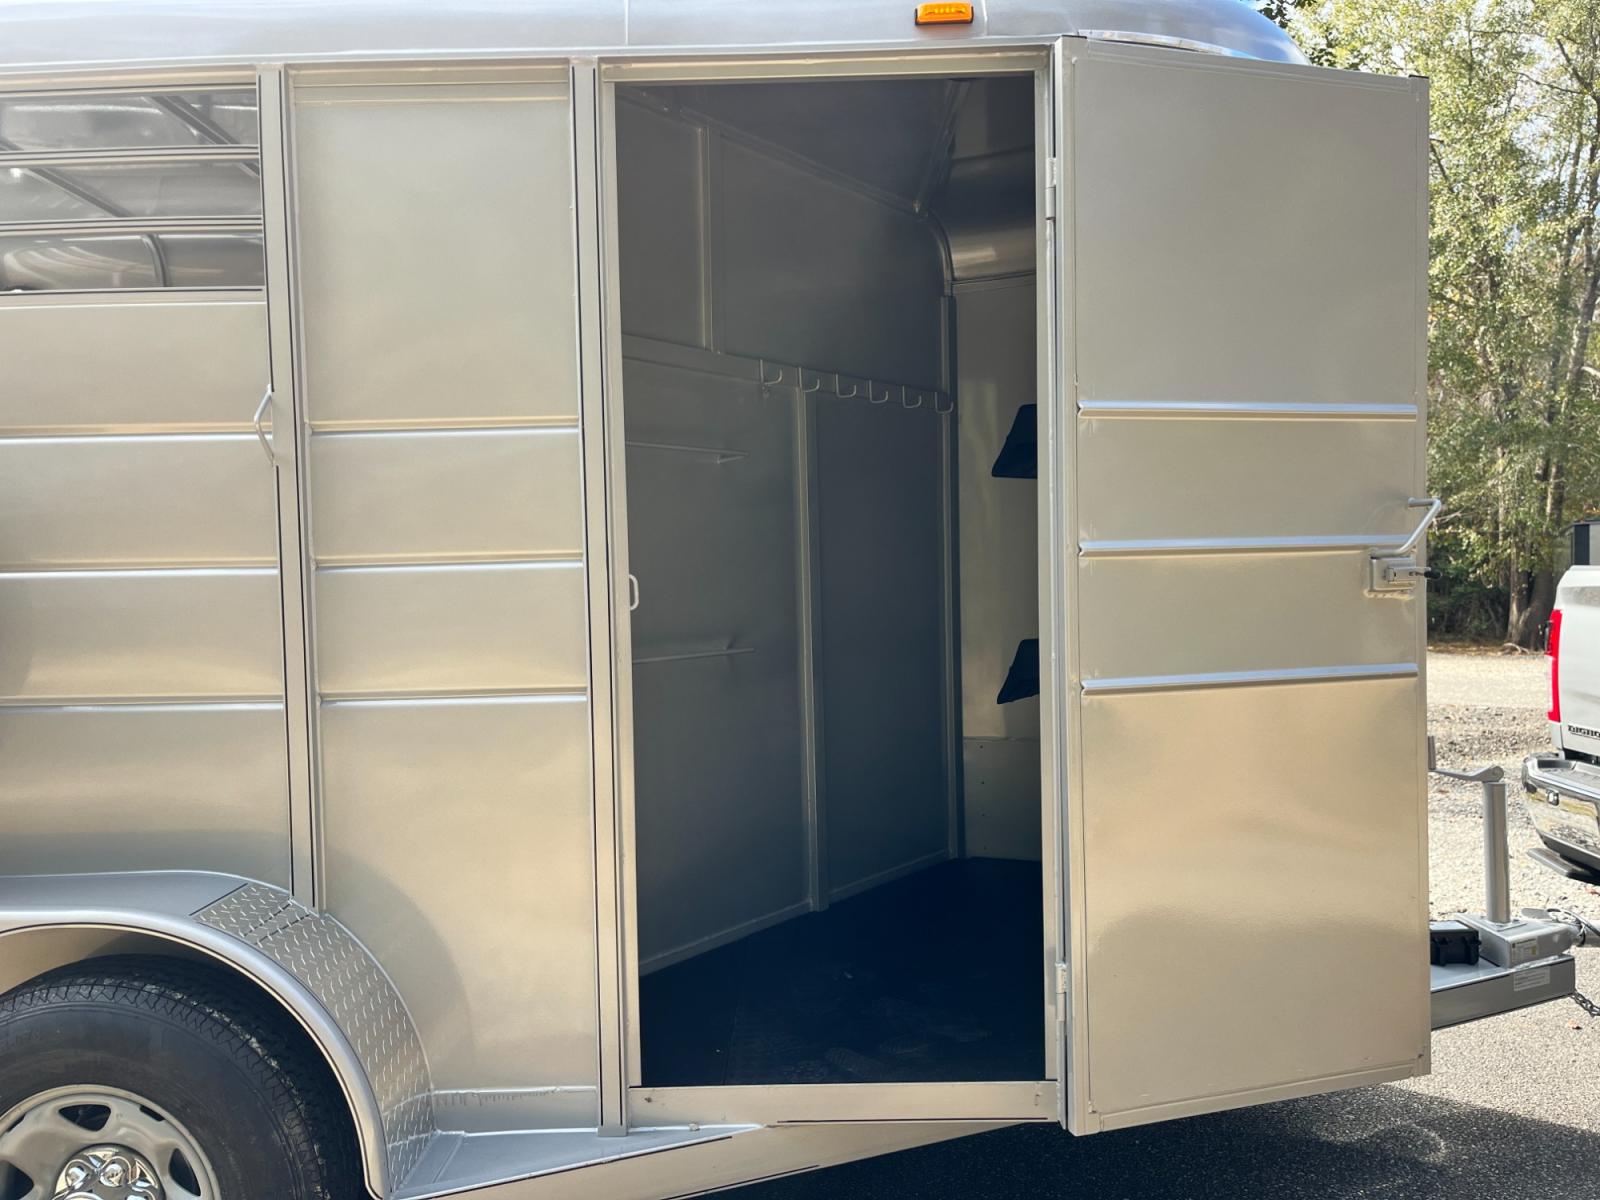 2023 Silver Metallic Calico 2 Horse Slant , located at 1330 Rainey Rd., Macon, 31220, (478) 960-1044, 32.845638, -83.778687 - Brand New 2023 Model 2 Horse Slant Calico Brand Trailer! 6ft Wide X 13ft Long Deluxe Model Tandem Axle Trailer! Easy Close Slant Divider Latch! 16" Radials! Beautiful Silver Metallic Paint is Awesome! Black Pin Striping Looks Fantastic! Fully Caulked Inside and Out to Prevent Rust! The Paint i - Photo #8